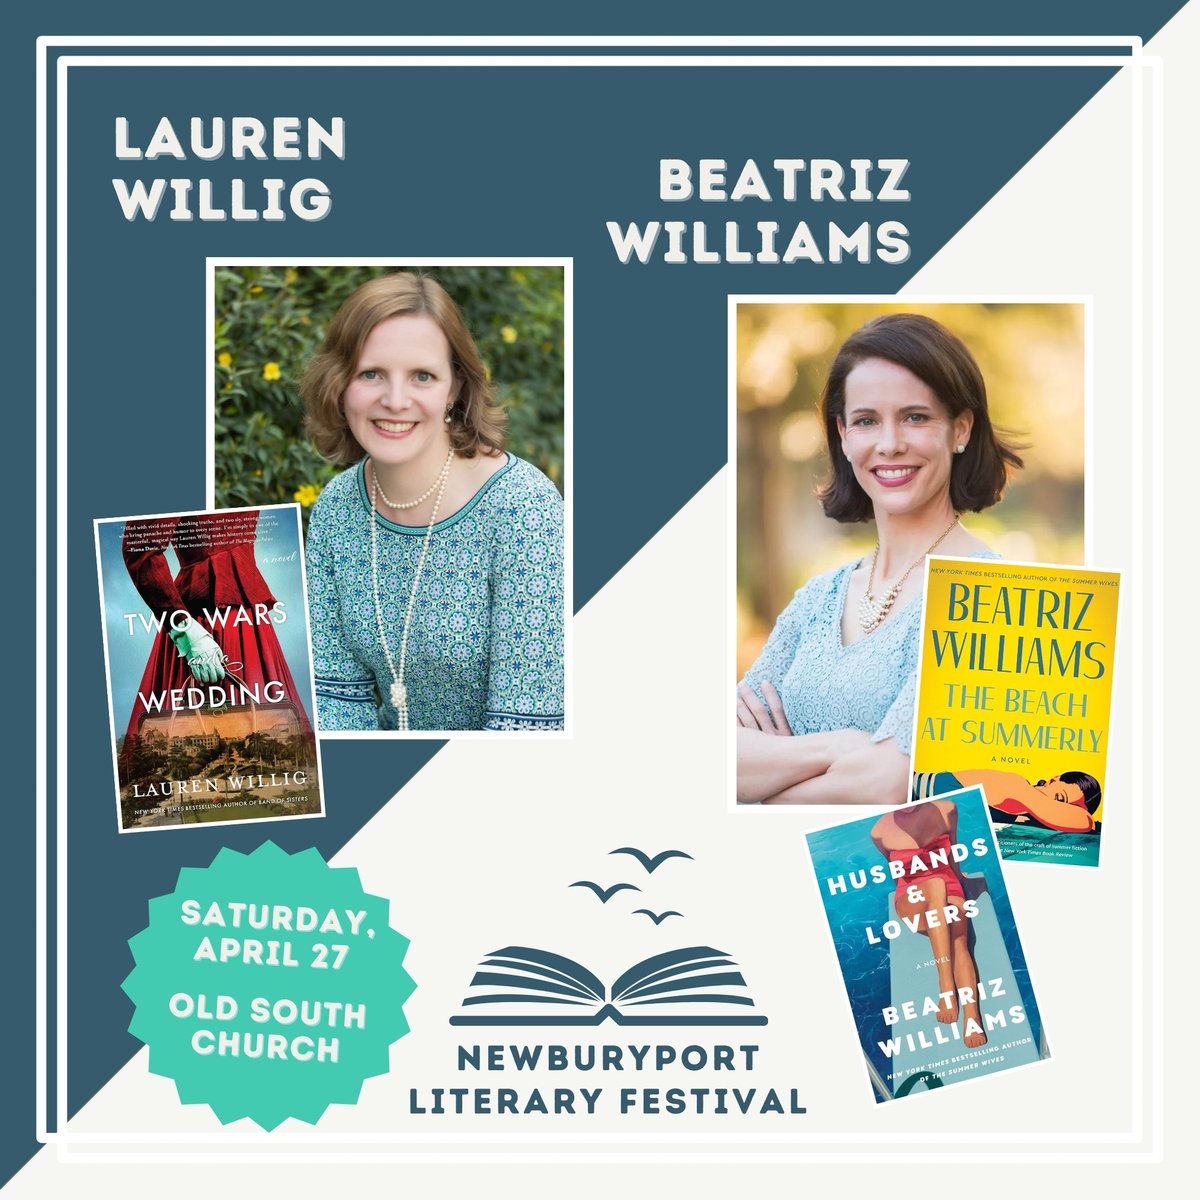 Together frequent collaborators and friends @authorbeatriz and @laurenwillig will discuss their work, their collaborative process, and how they make so many historical moments come alive on Saturday, April 27 at 9:00AM at the Old South Church in #Newburyport.